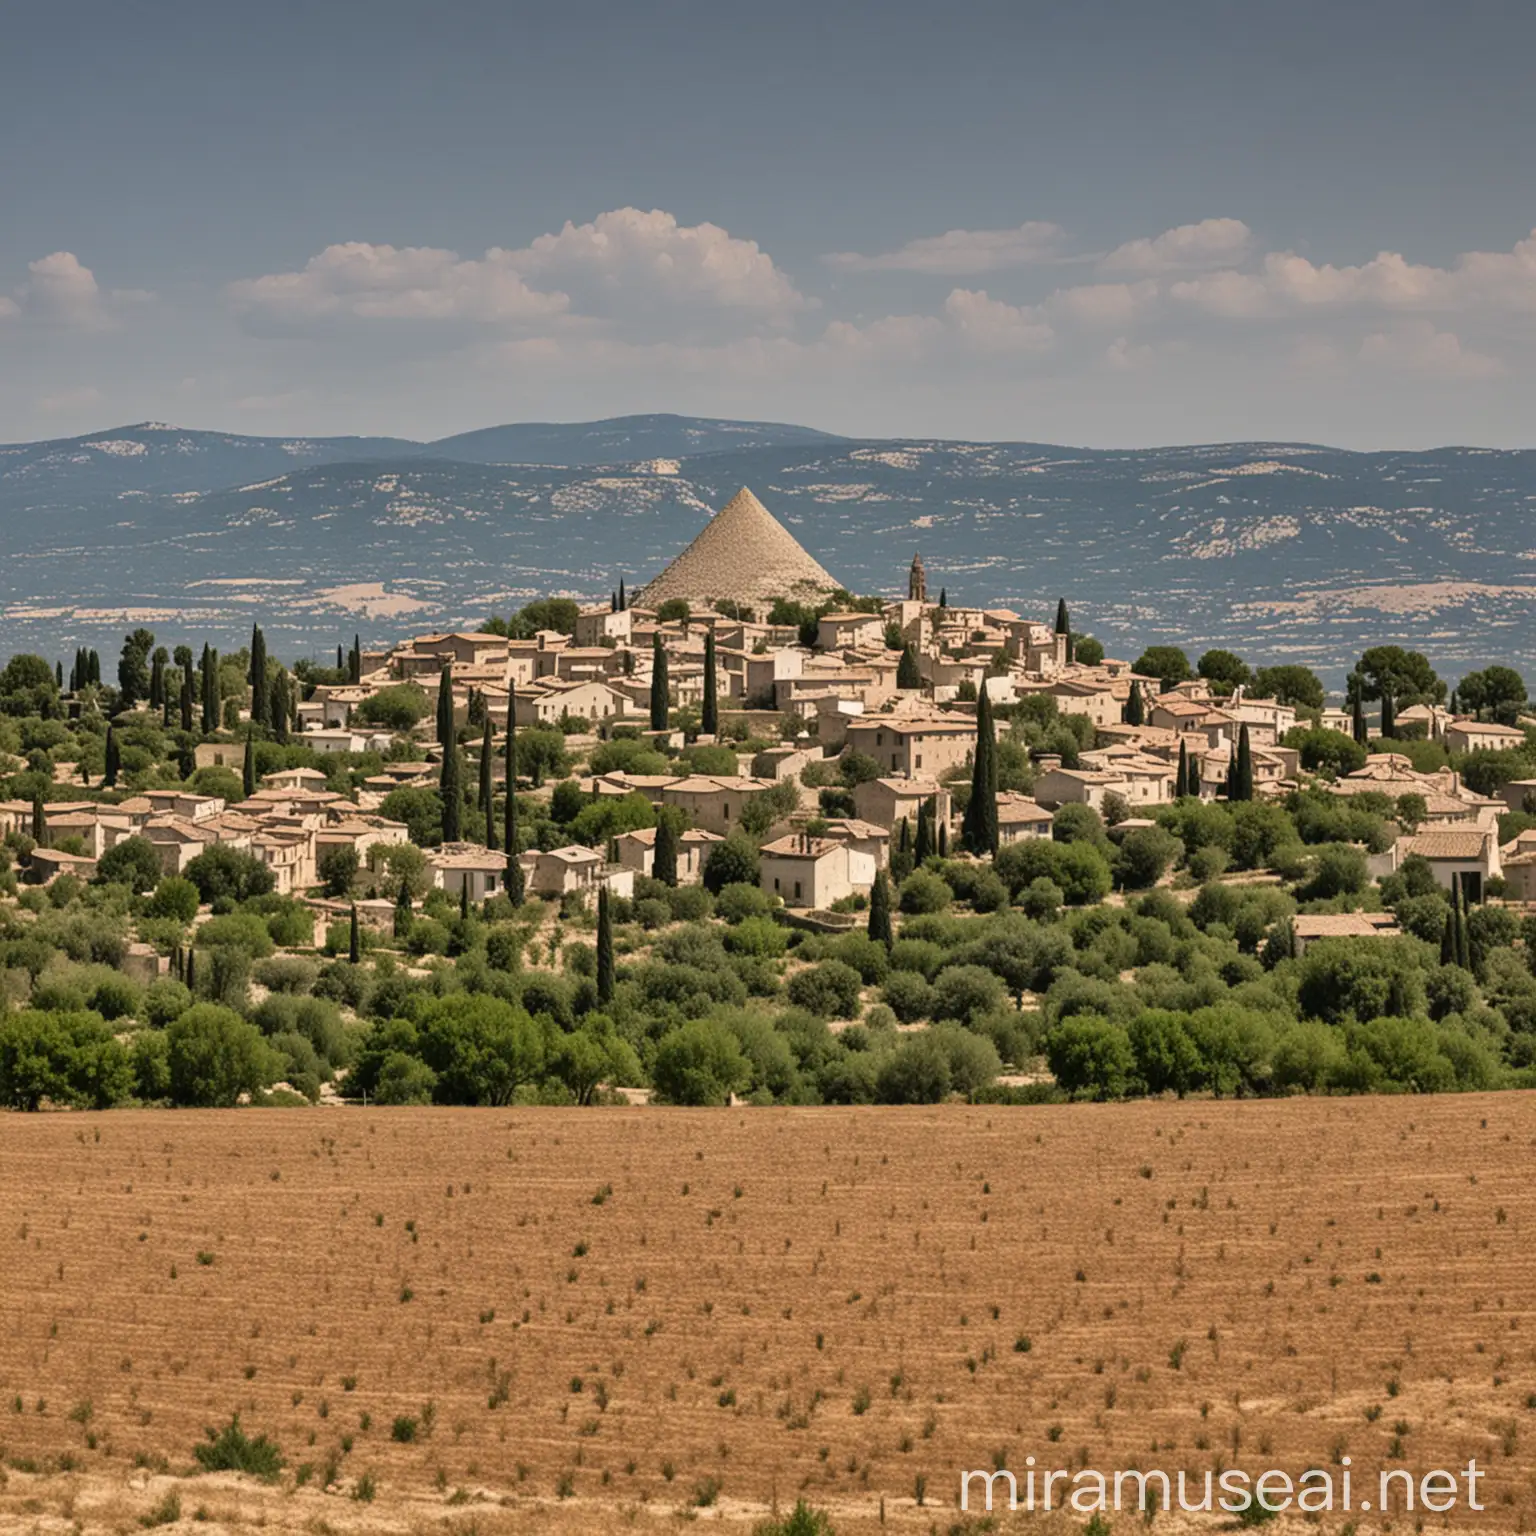 Picturesque Provence Village Landscape with Pyramids of Giza Plateau